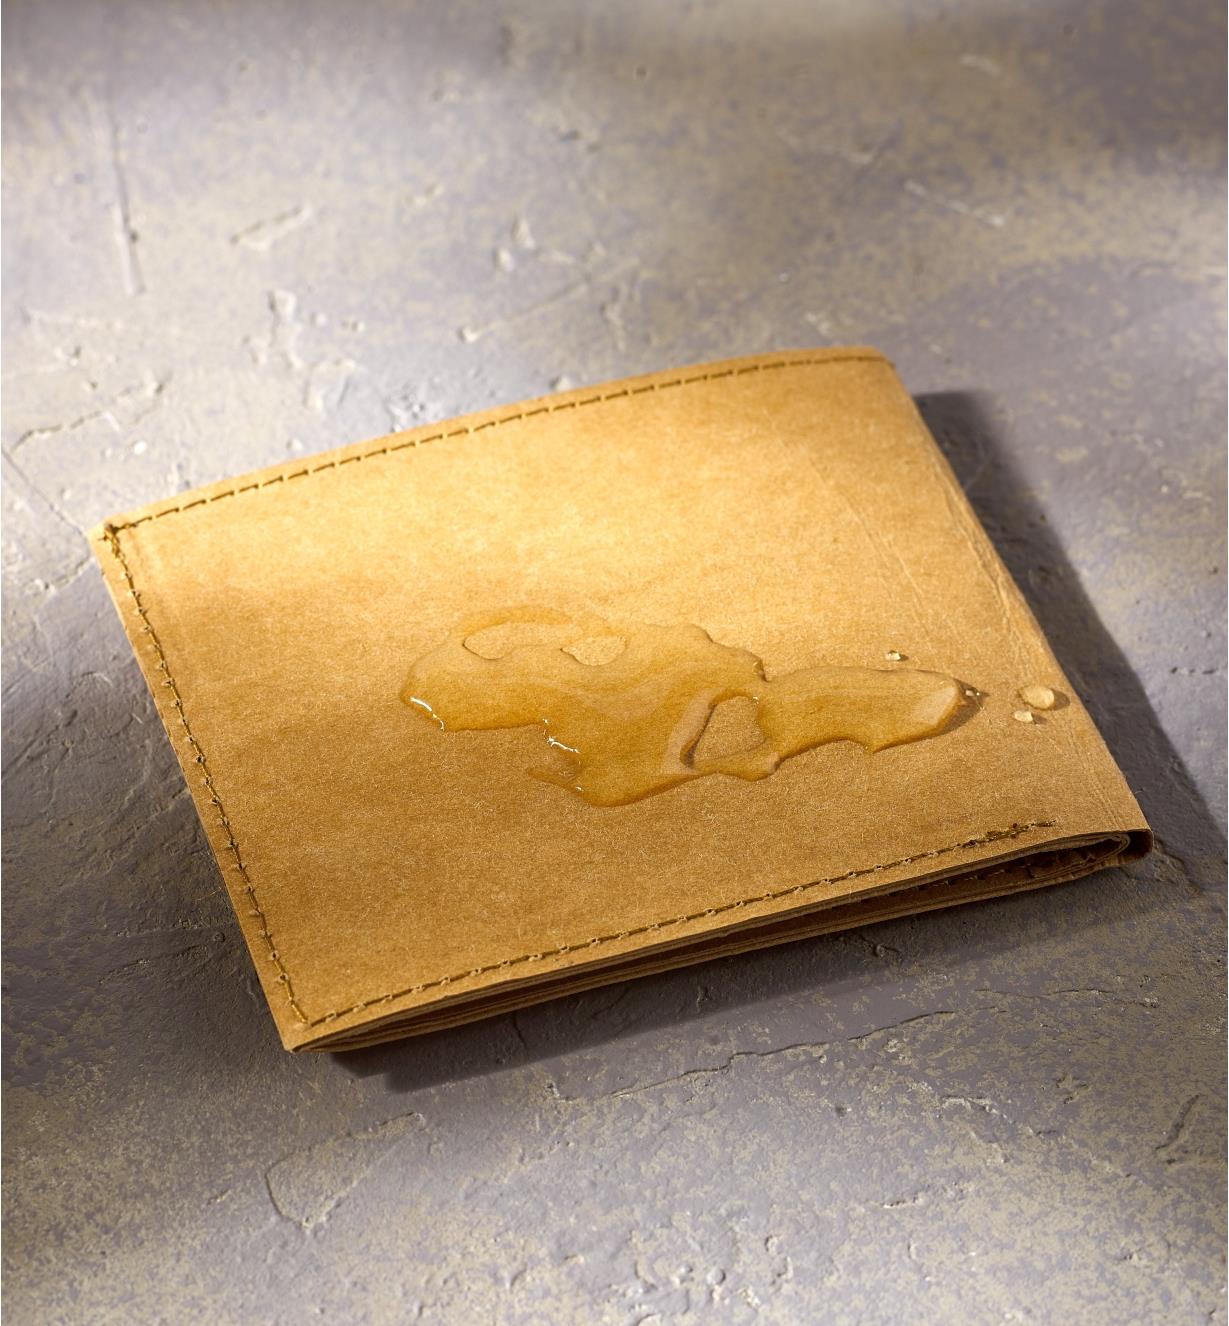 A water spill on the outside of the tree leather classic billfold wallet